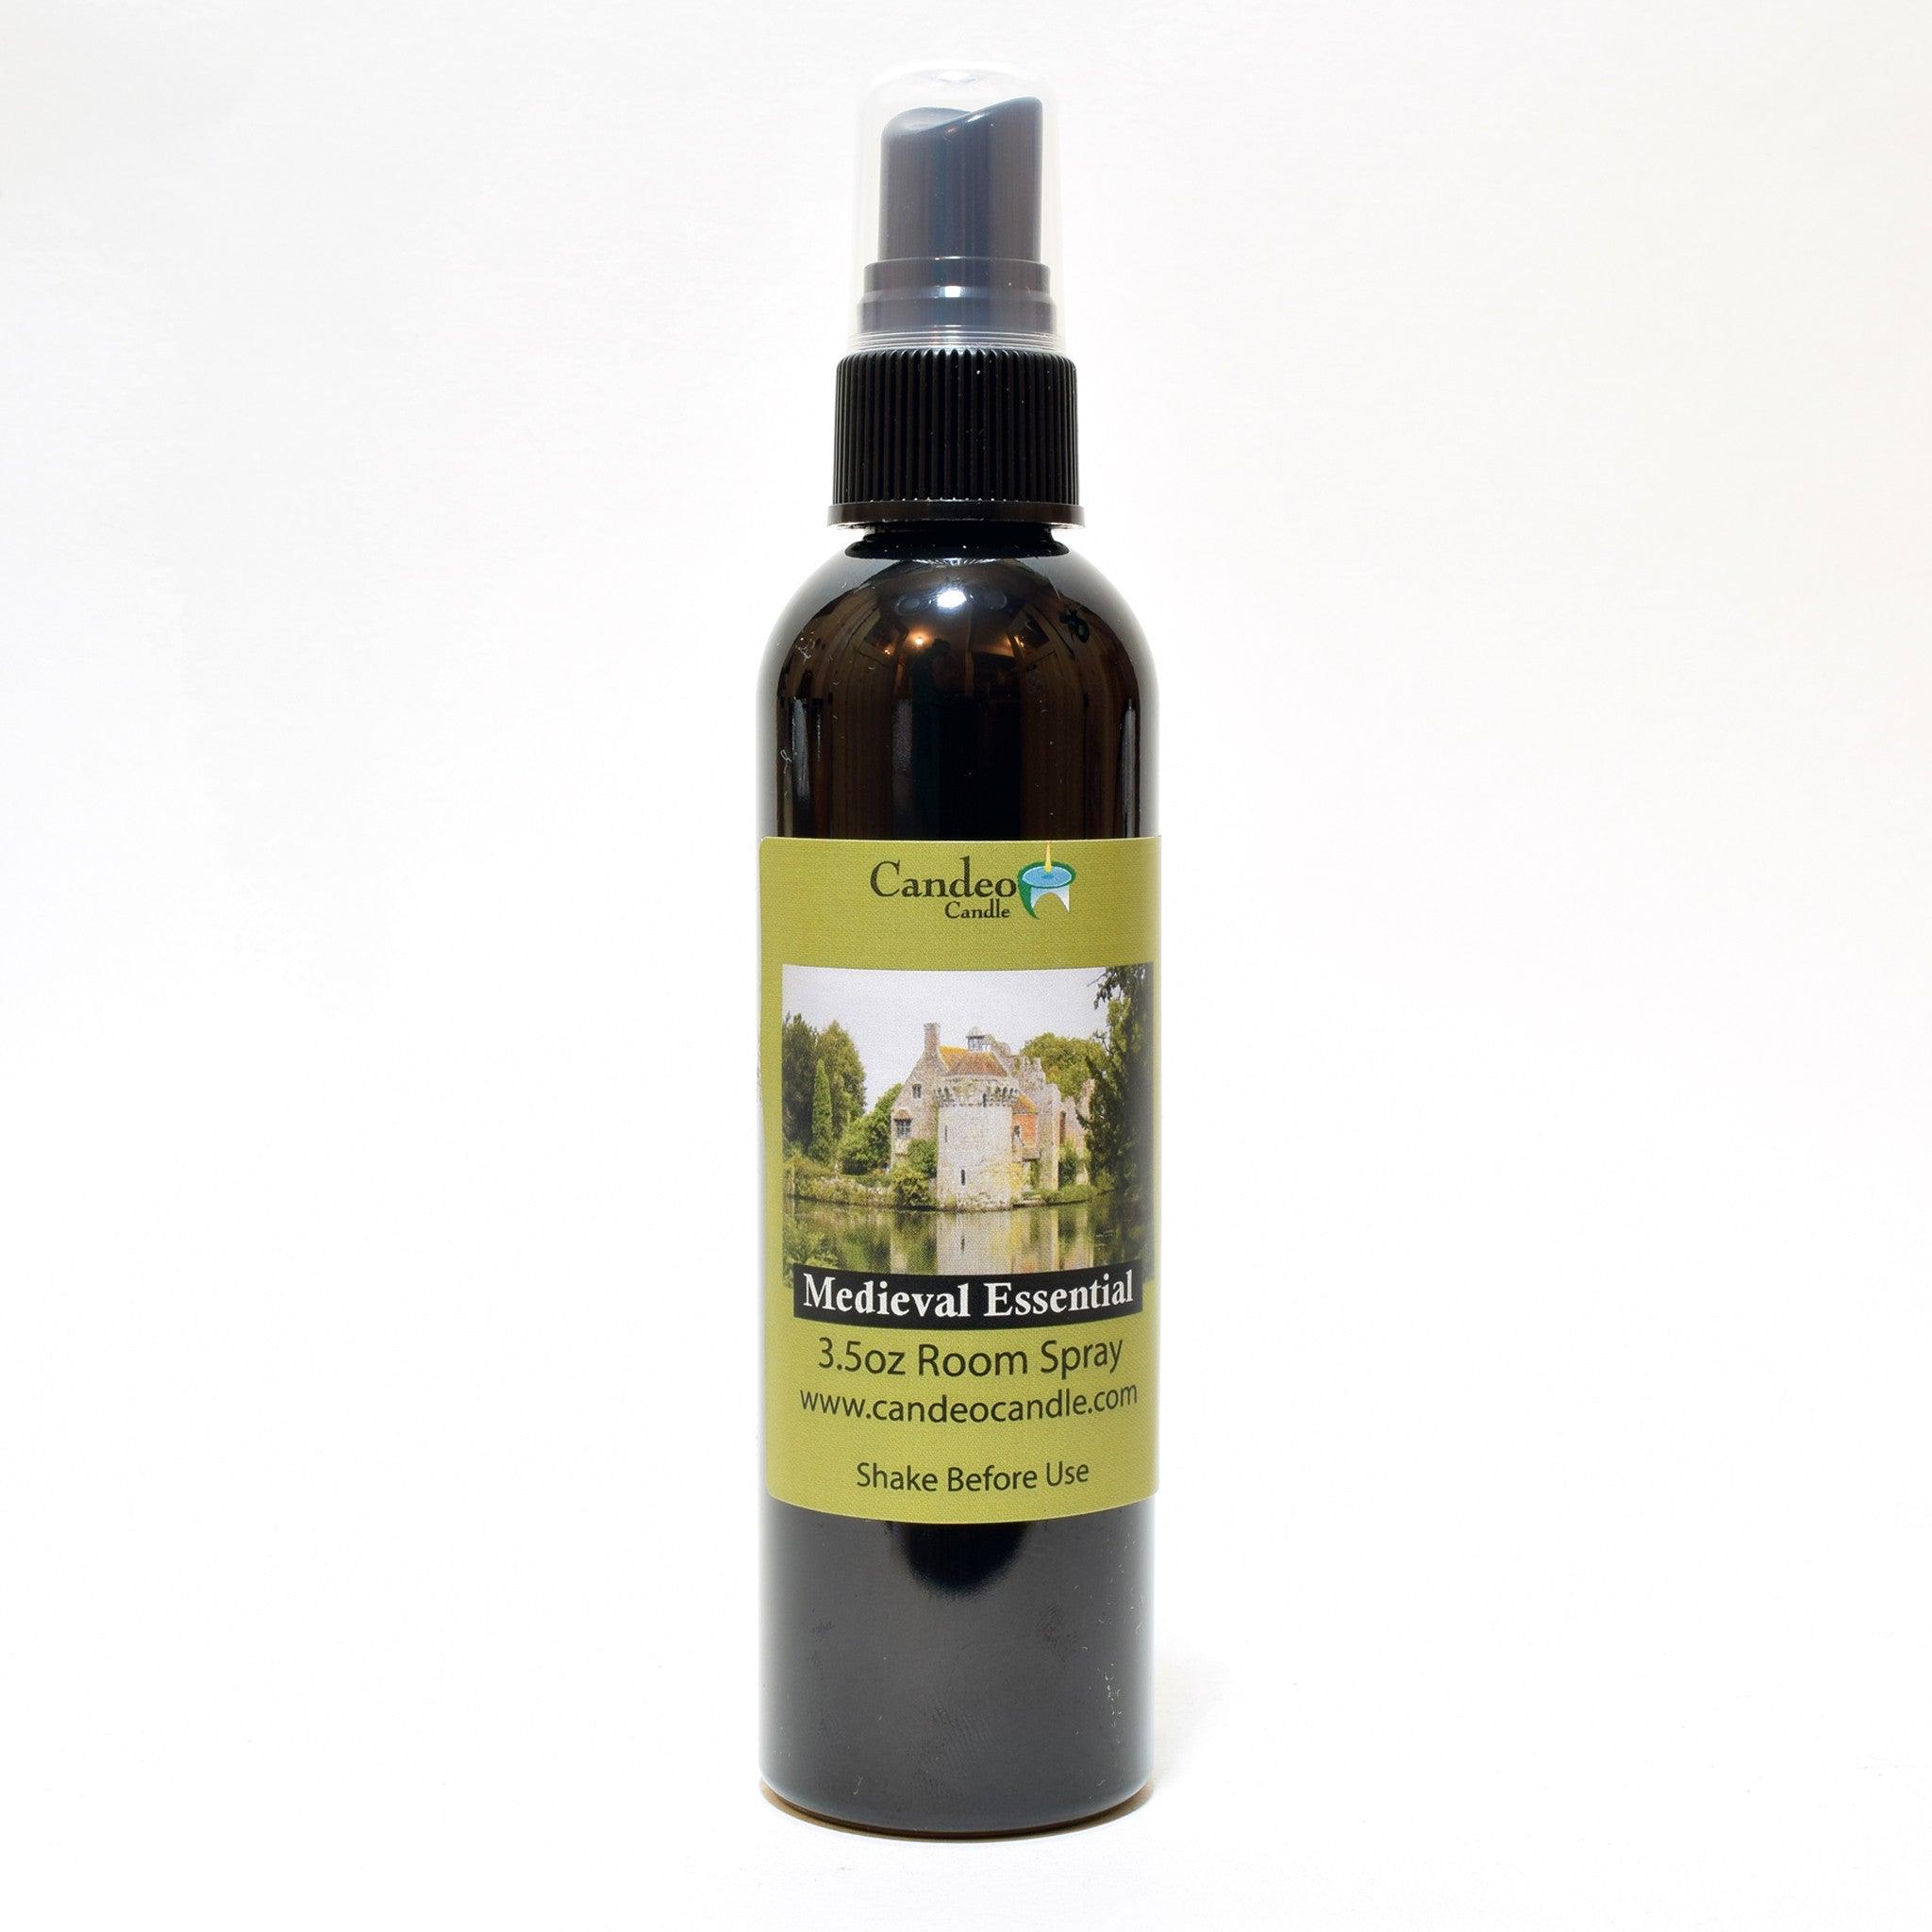 Medieval Essential Oil, 3.5 oz Room Spray - Candeo Candle